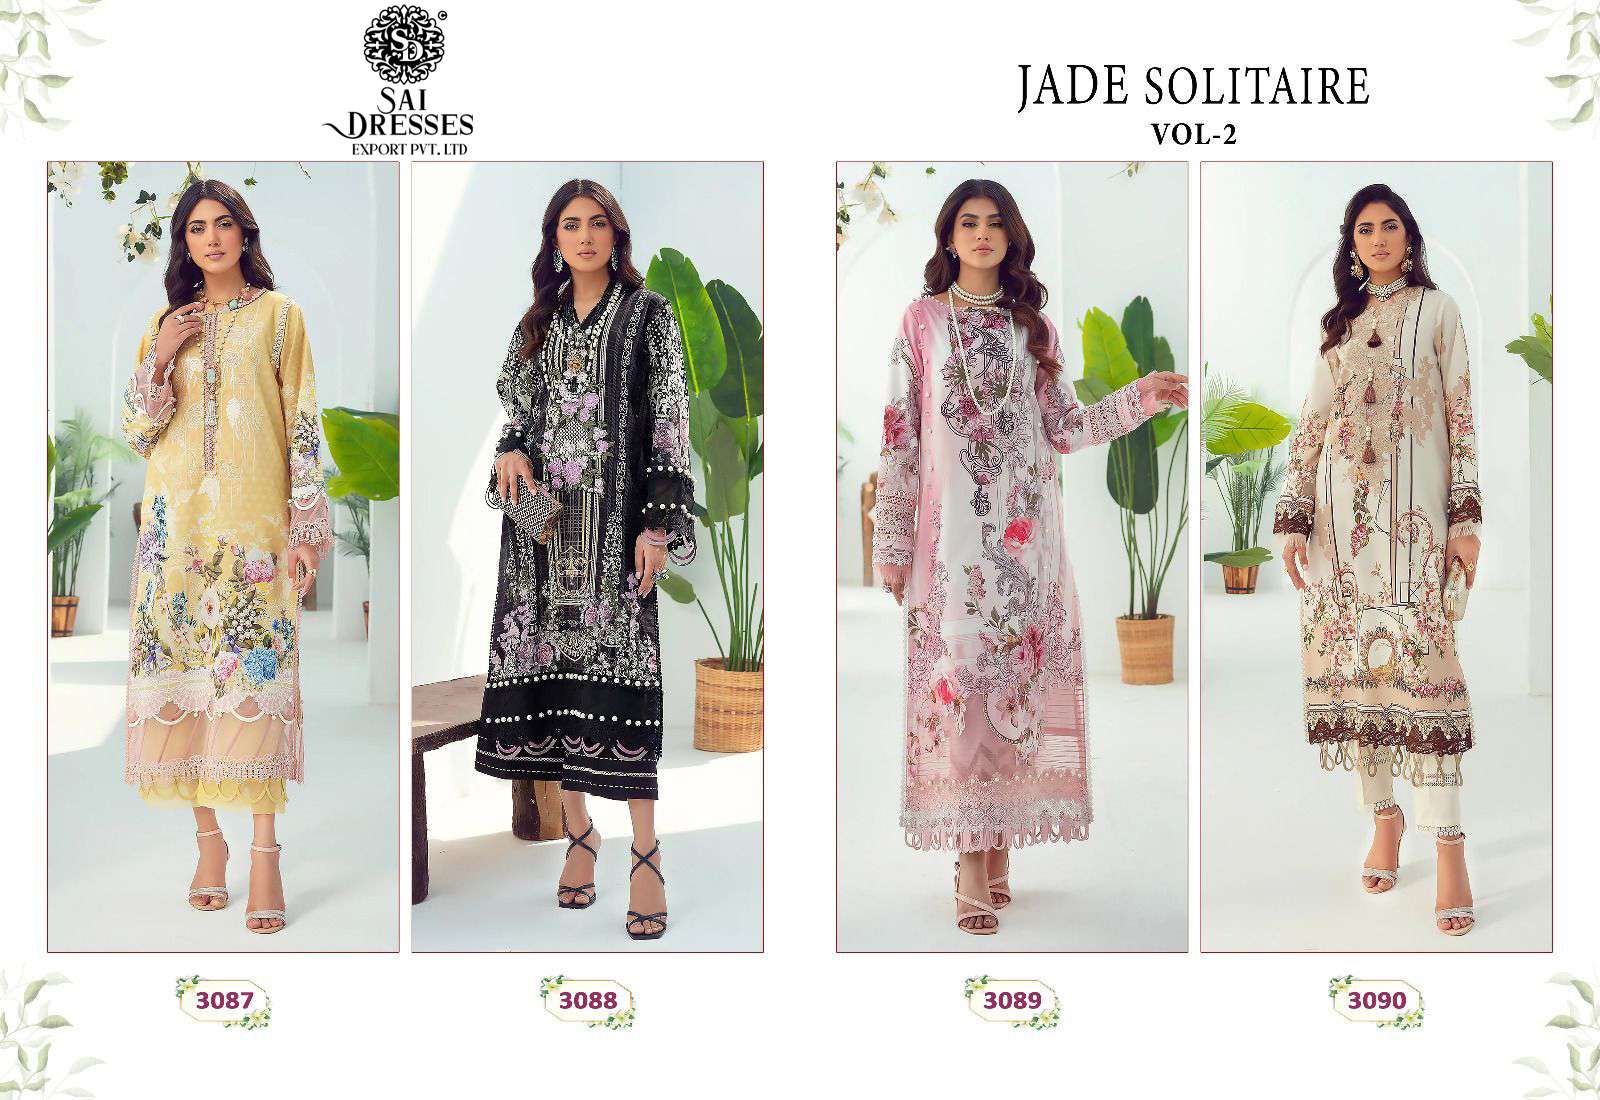 SAI DRESSES PRESENT JADE SOLITAIRE VOL 2 PURE COTTON PATCH EMBROIDERED PAKISTANI SALWAR SUITS IN WHOLESALE RATE IN SURAT